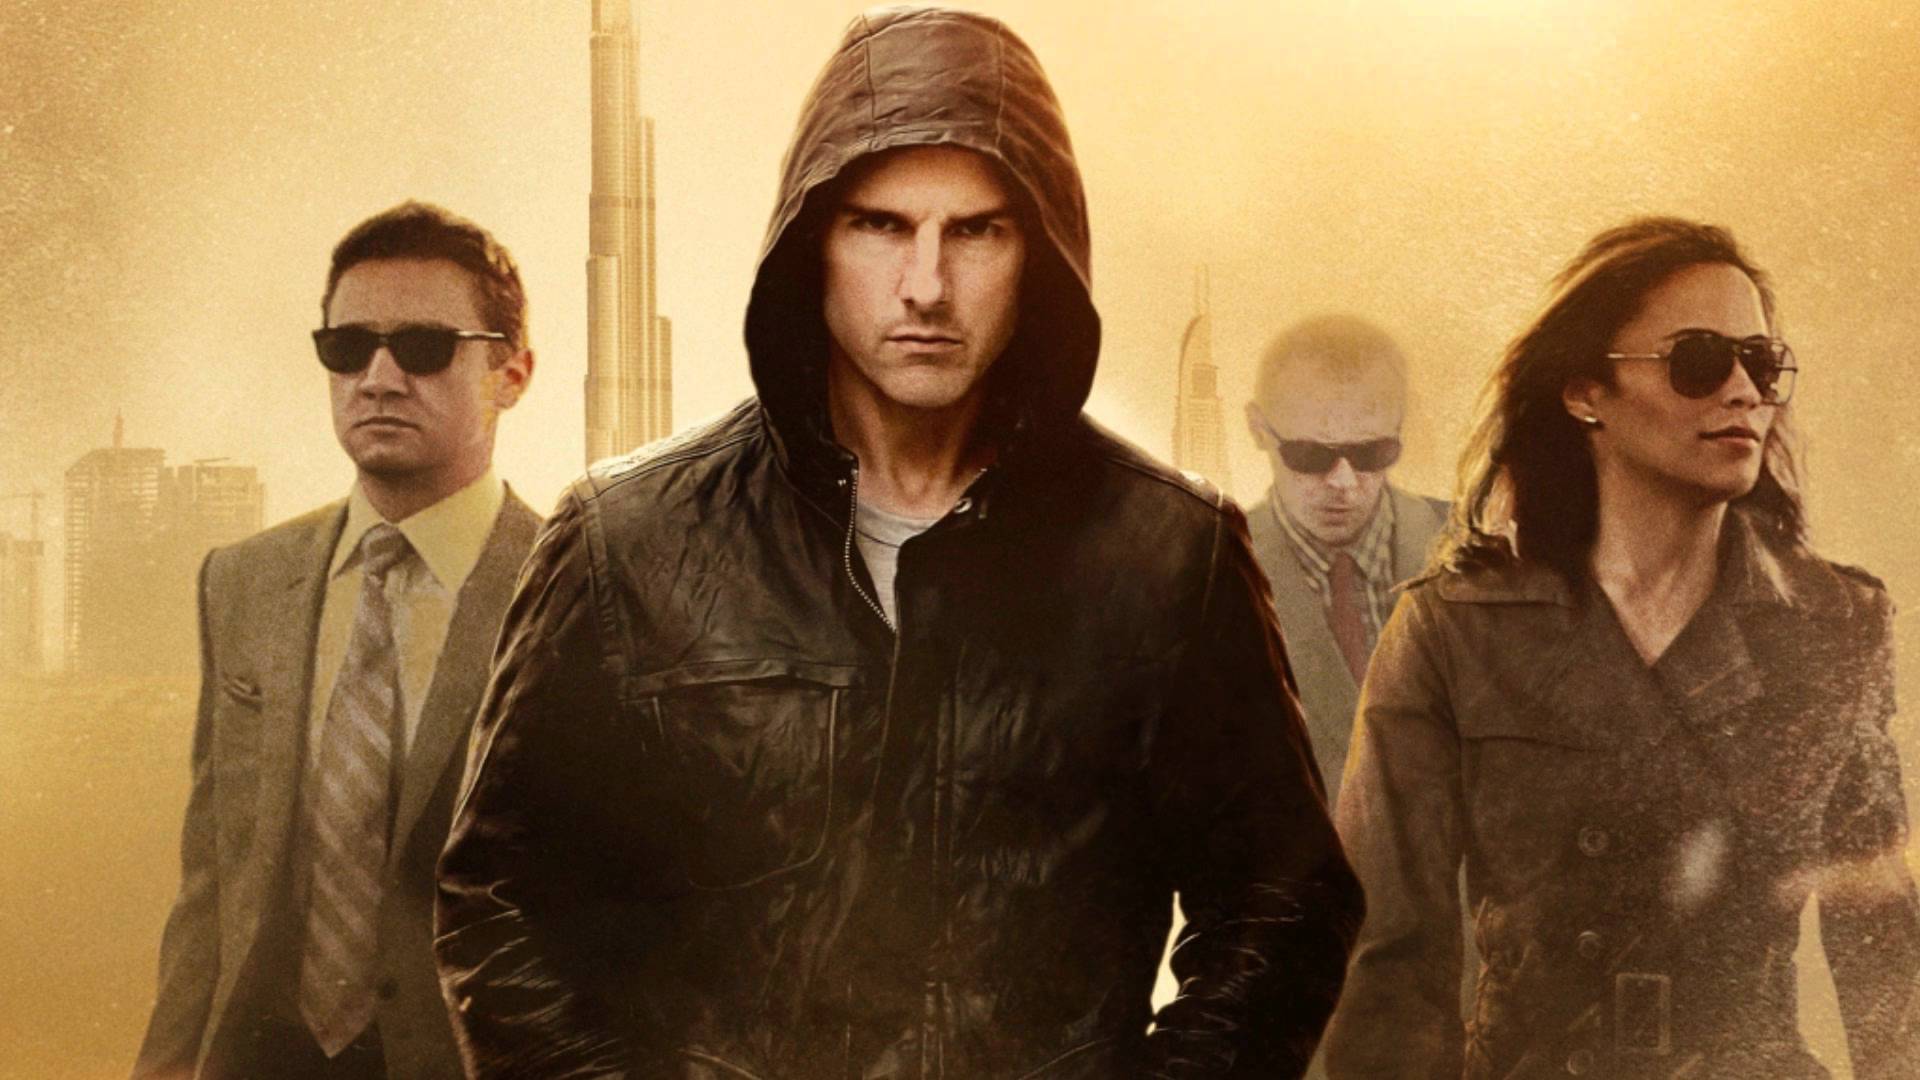 Tom Cruise Shared Another Thrilling Image From MISSION: IMPOSSIBLE